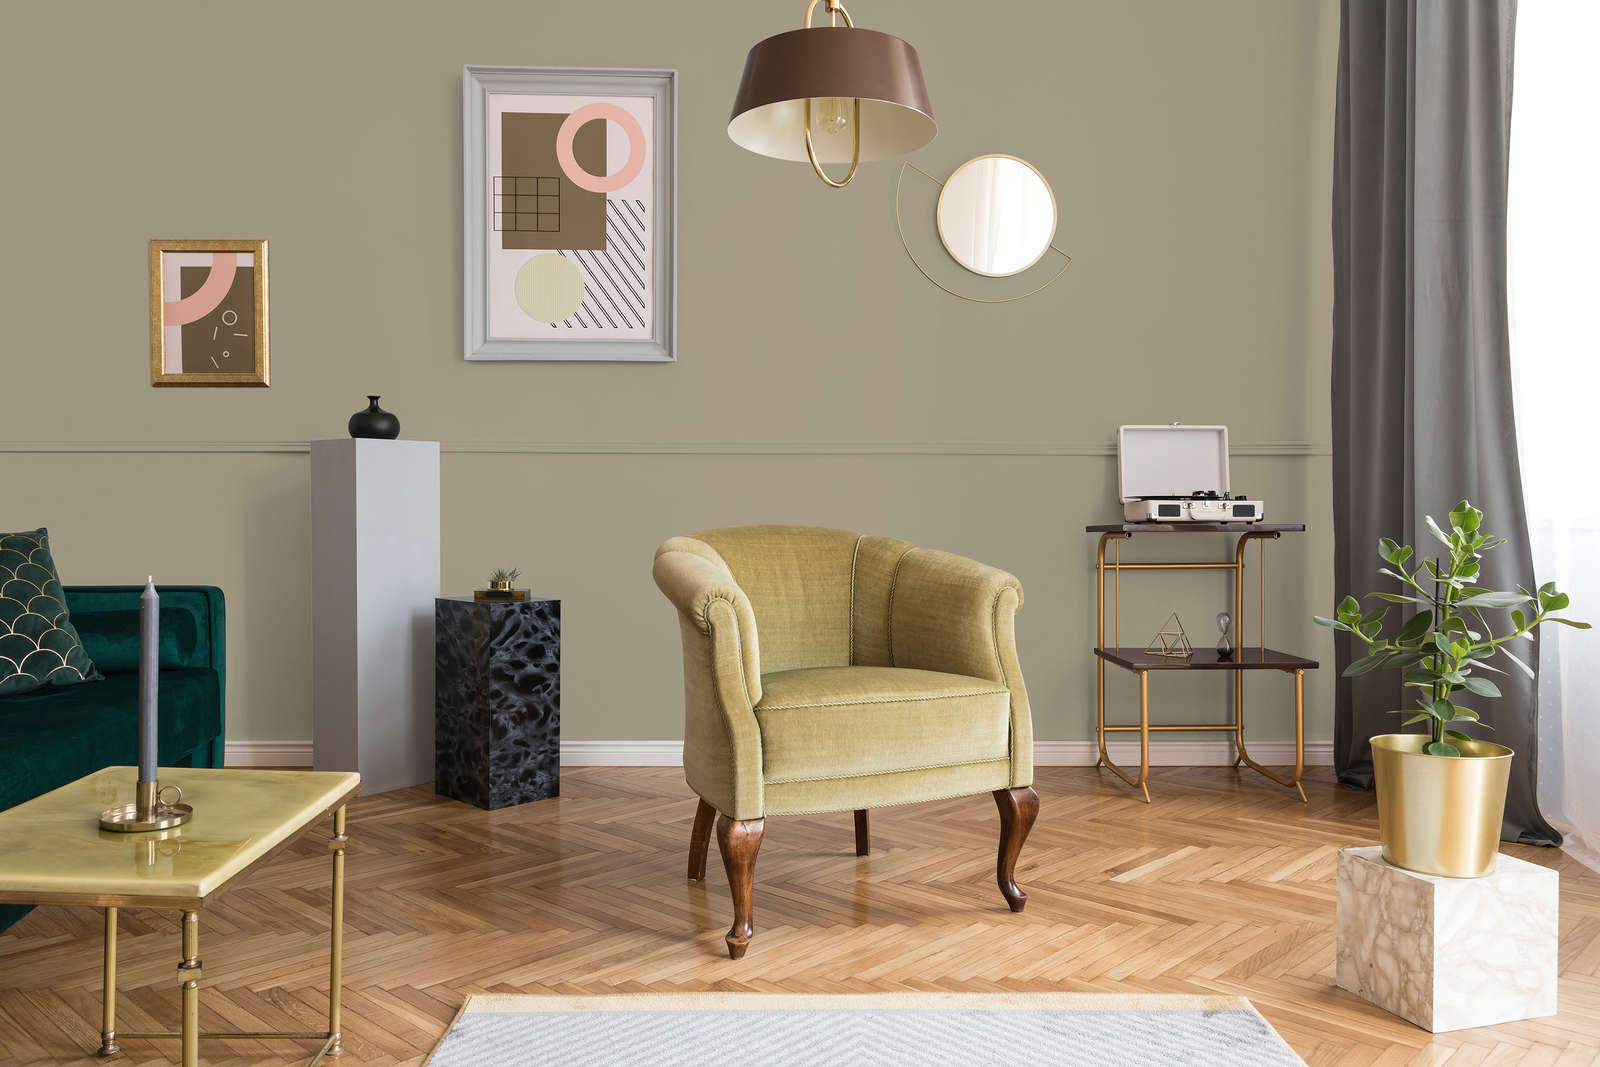             Premium Wall Paint homely light beige »Lucky Lime« NW604 – 1 litre
        